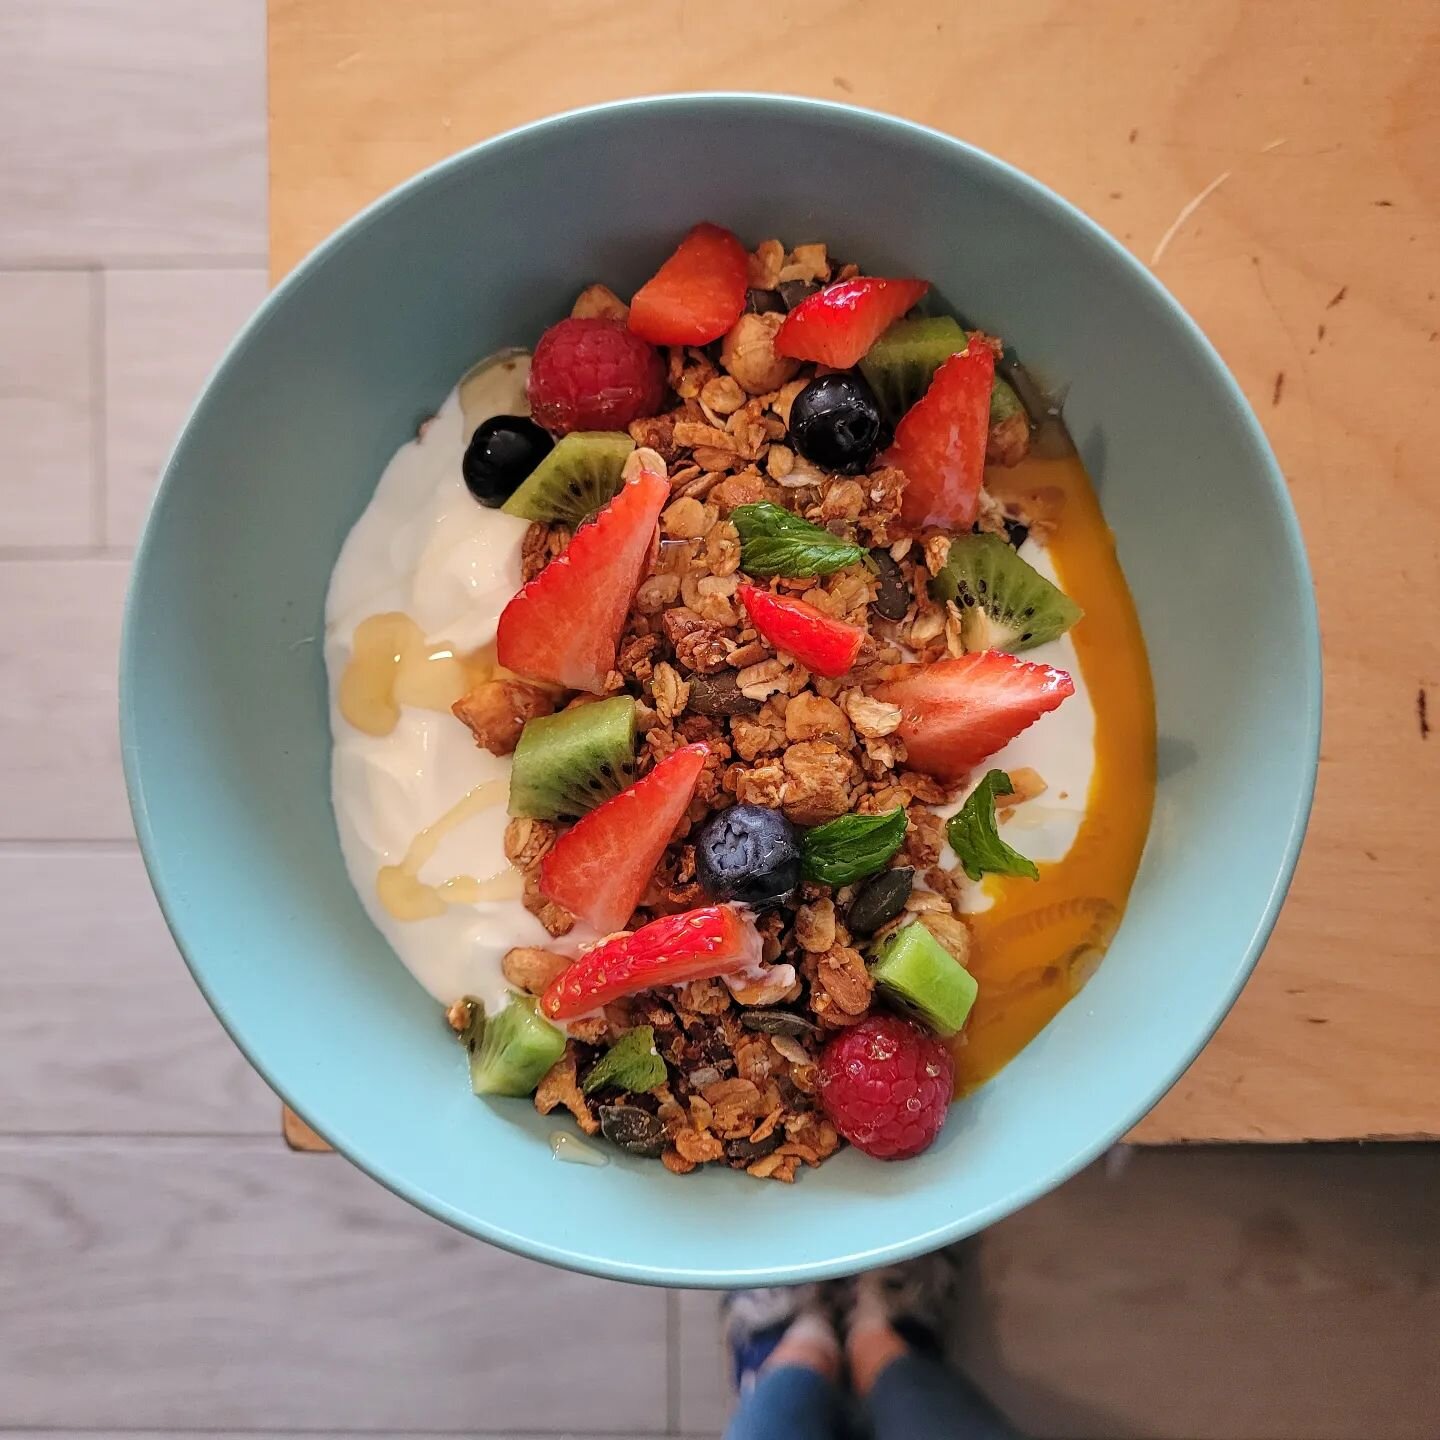 Spring is here 🌼 and so is our fresh new granola with mango compote and fresh fruit 😋
Available every day!